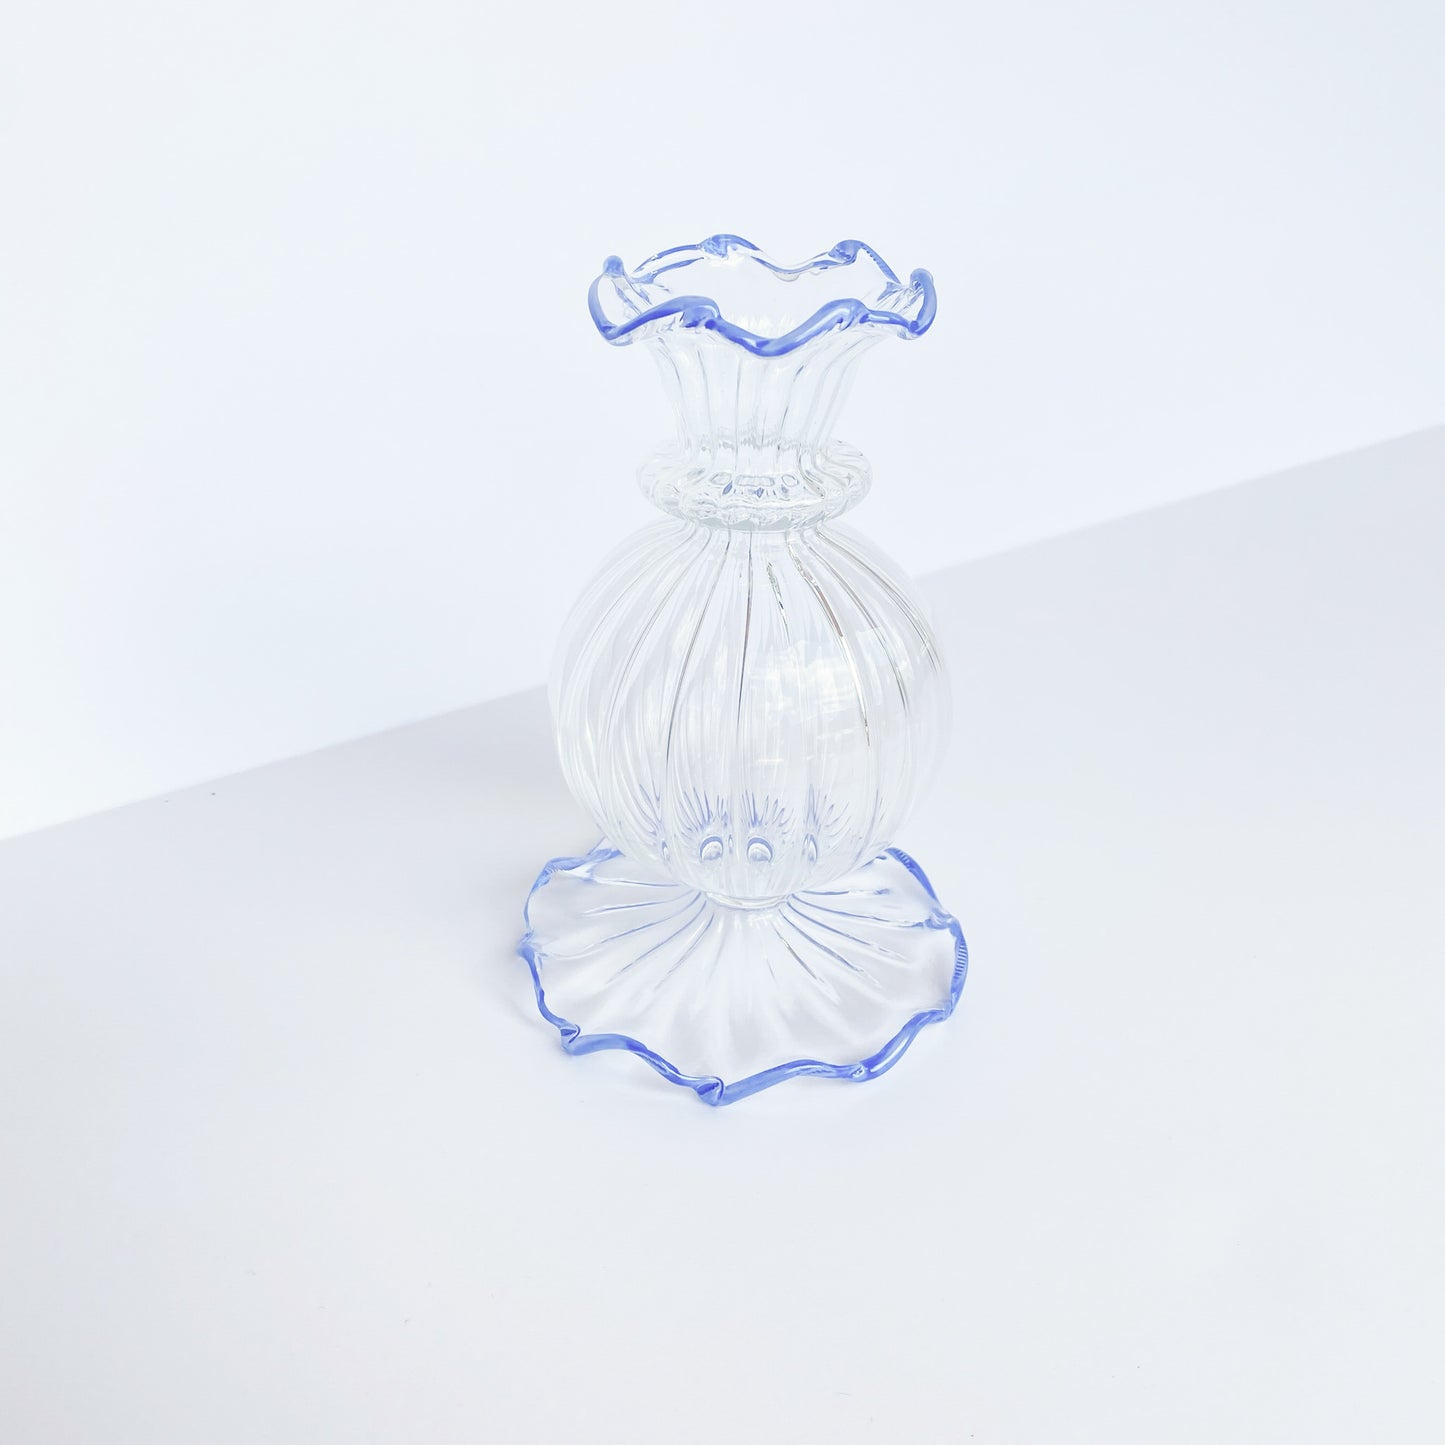 Clear glass bud vase with ruffled blue rim at the top and bottom.